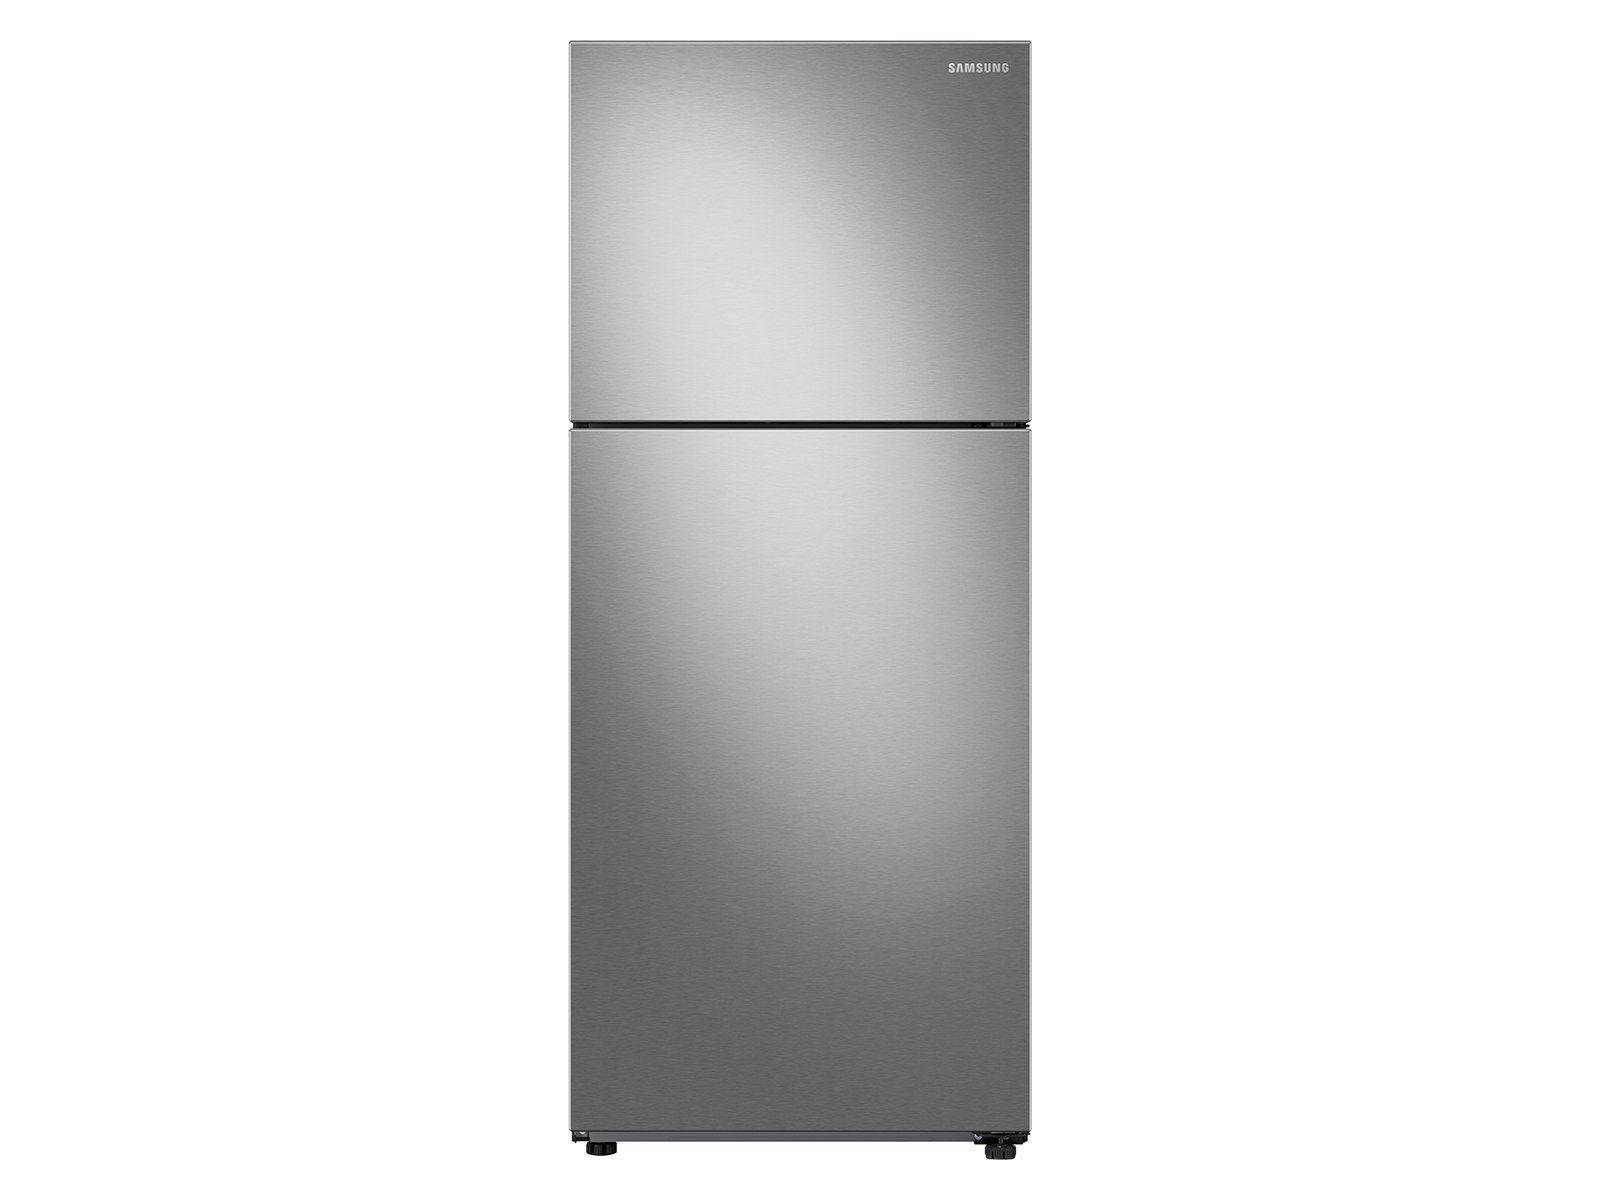 Photos - Fridge Samsung 15.6 cu. ft. Top Freezer Refrigerator with All-Around Cooling in B 